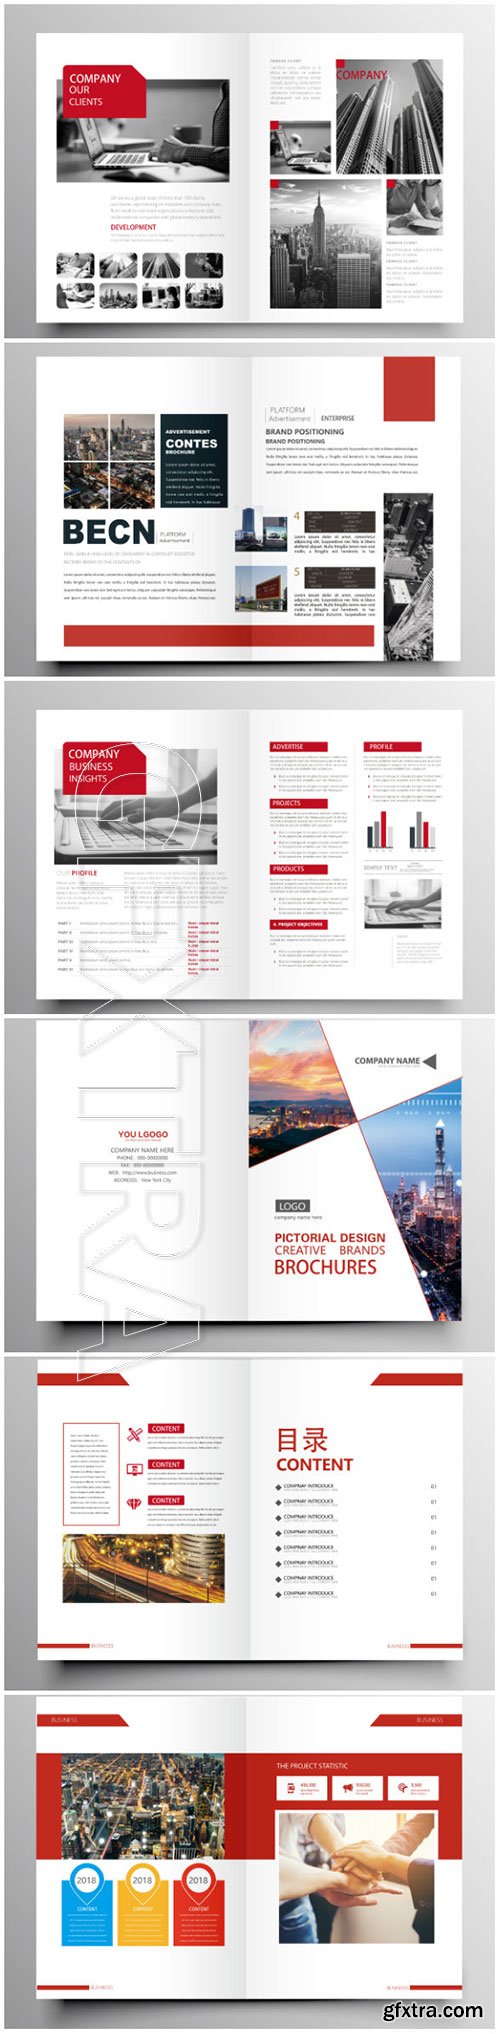 Brochure template vector layout design, corporate business annual report, magazine, flyer mockup # 194